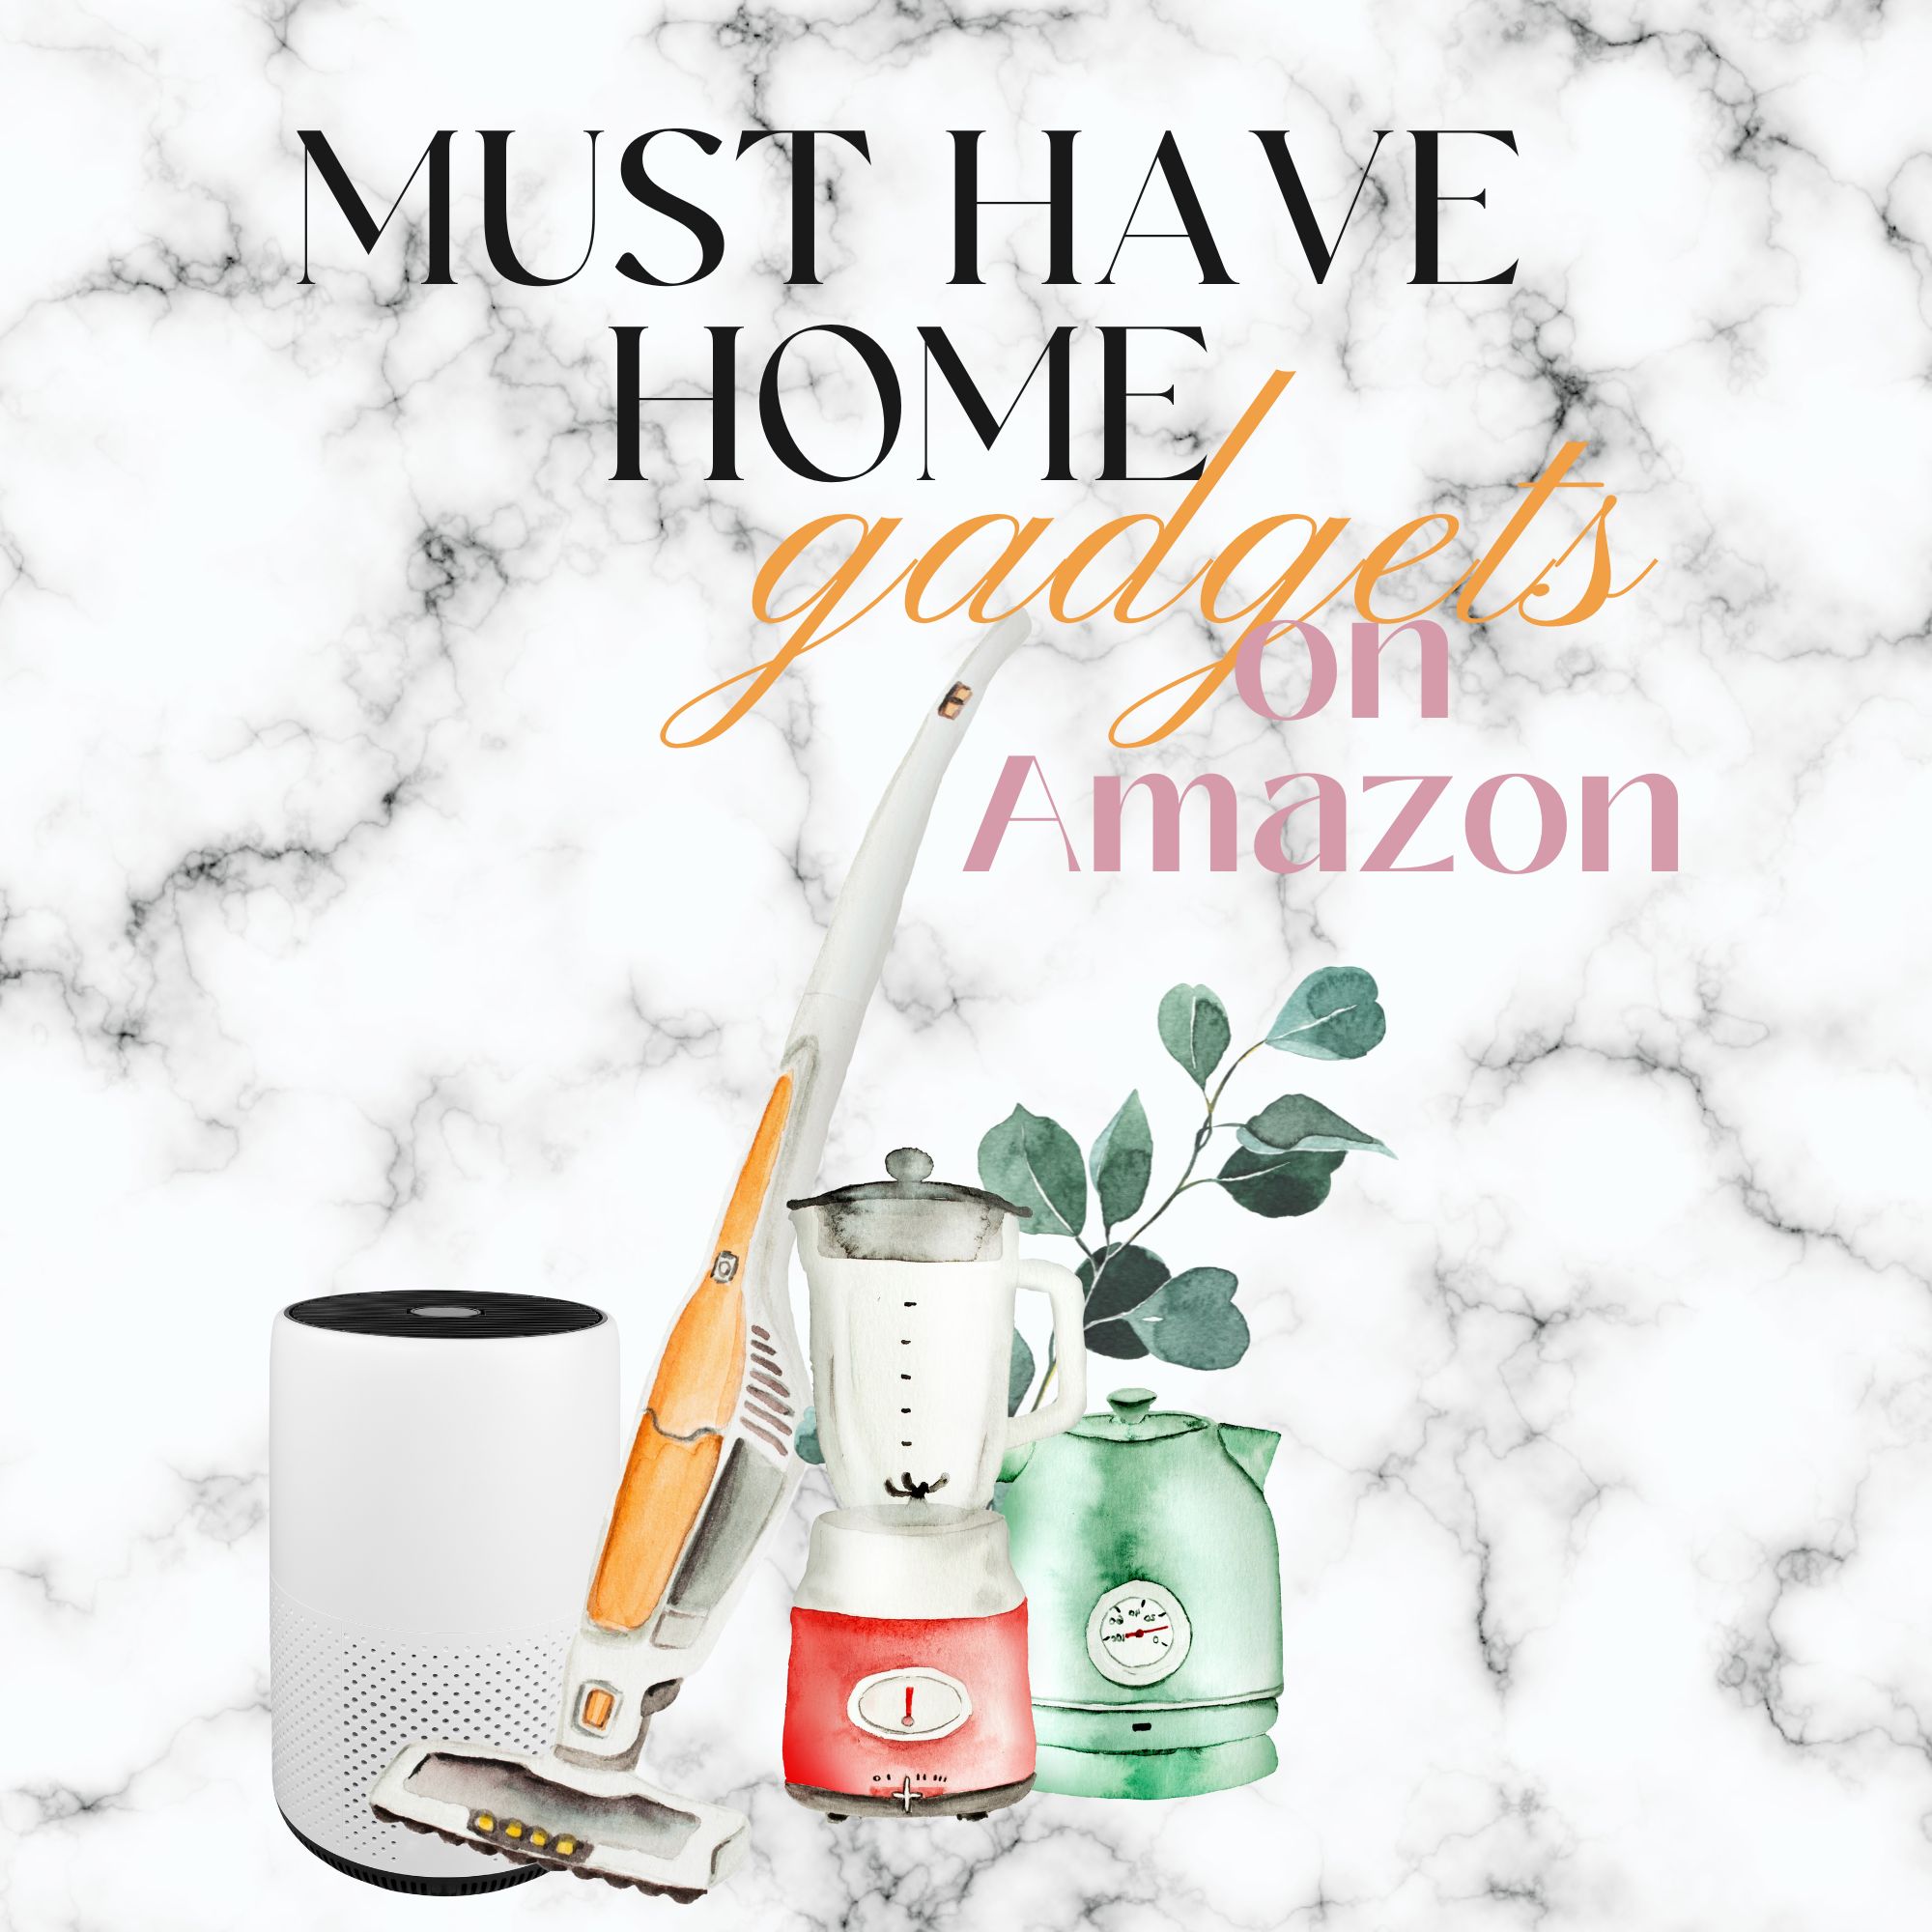 Must Have Home Gadgets on Amazon!